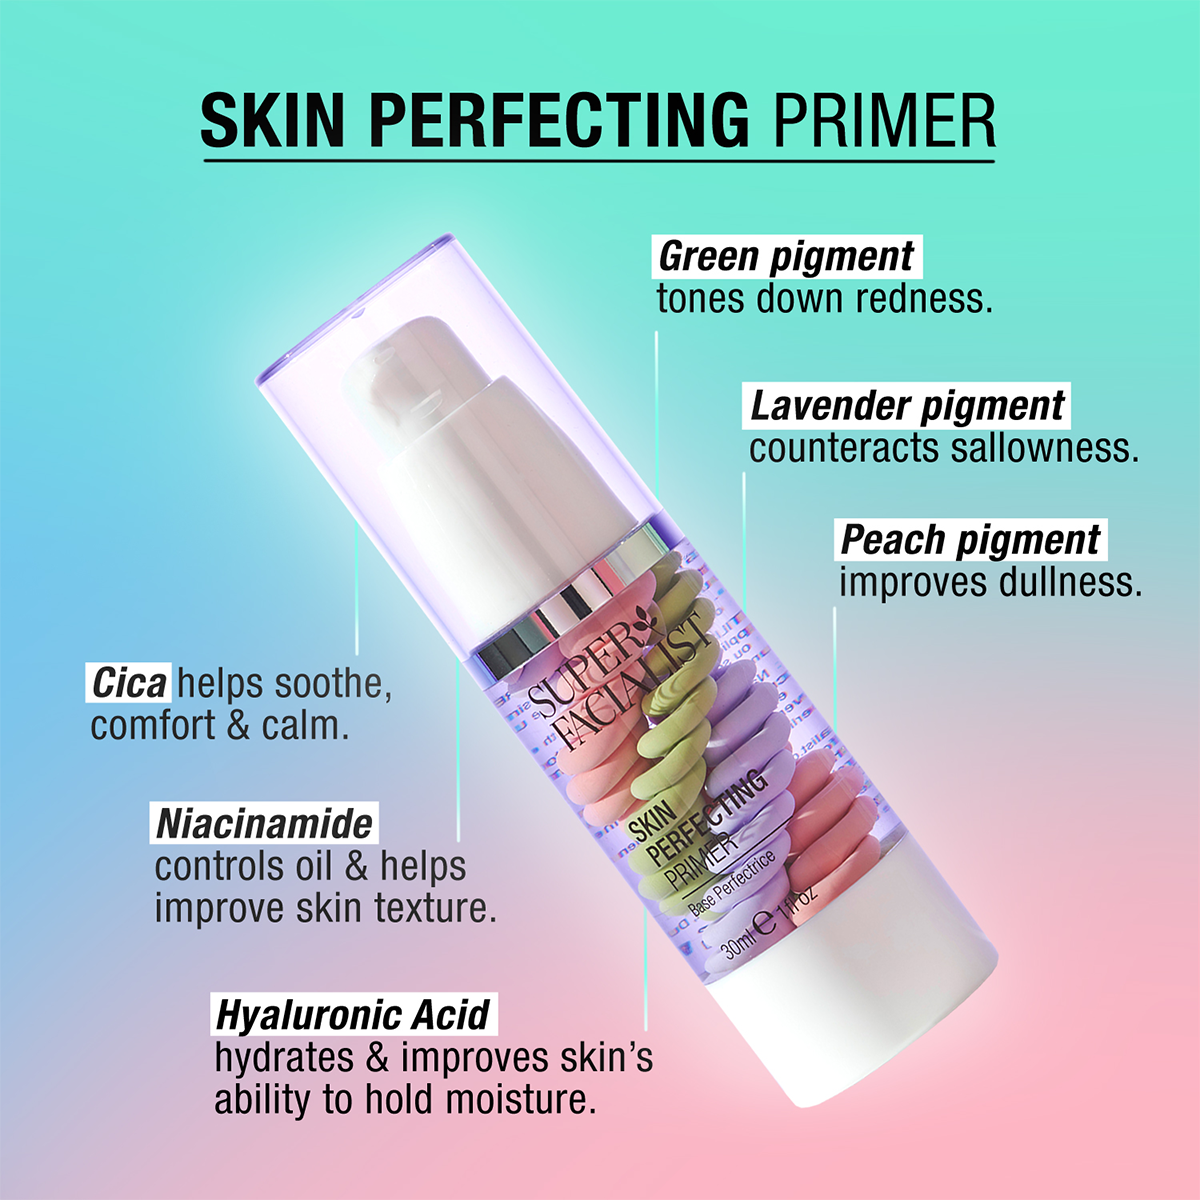 Skin perfecting primer,cica helps soothe, comfort and calm,green pigment tones down redness,niacinamide controls oil and helps improve skin texture, hyaluronic acid hydrates and improves skin's ability to hold moisture,lavender pigment counteracts sallowness,peach pigment improves dullness 